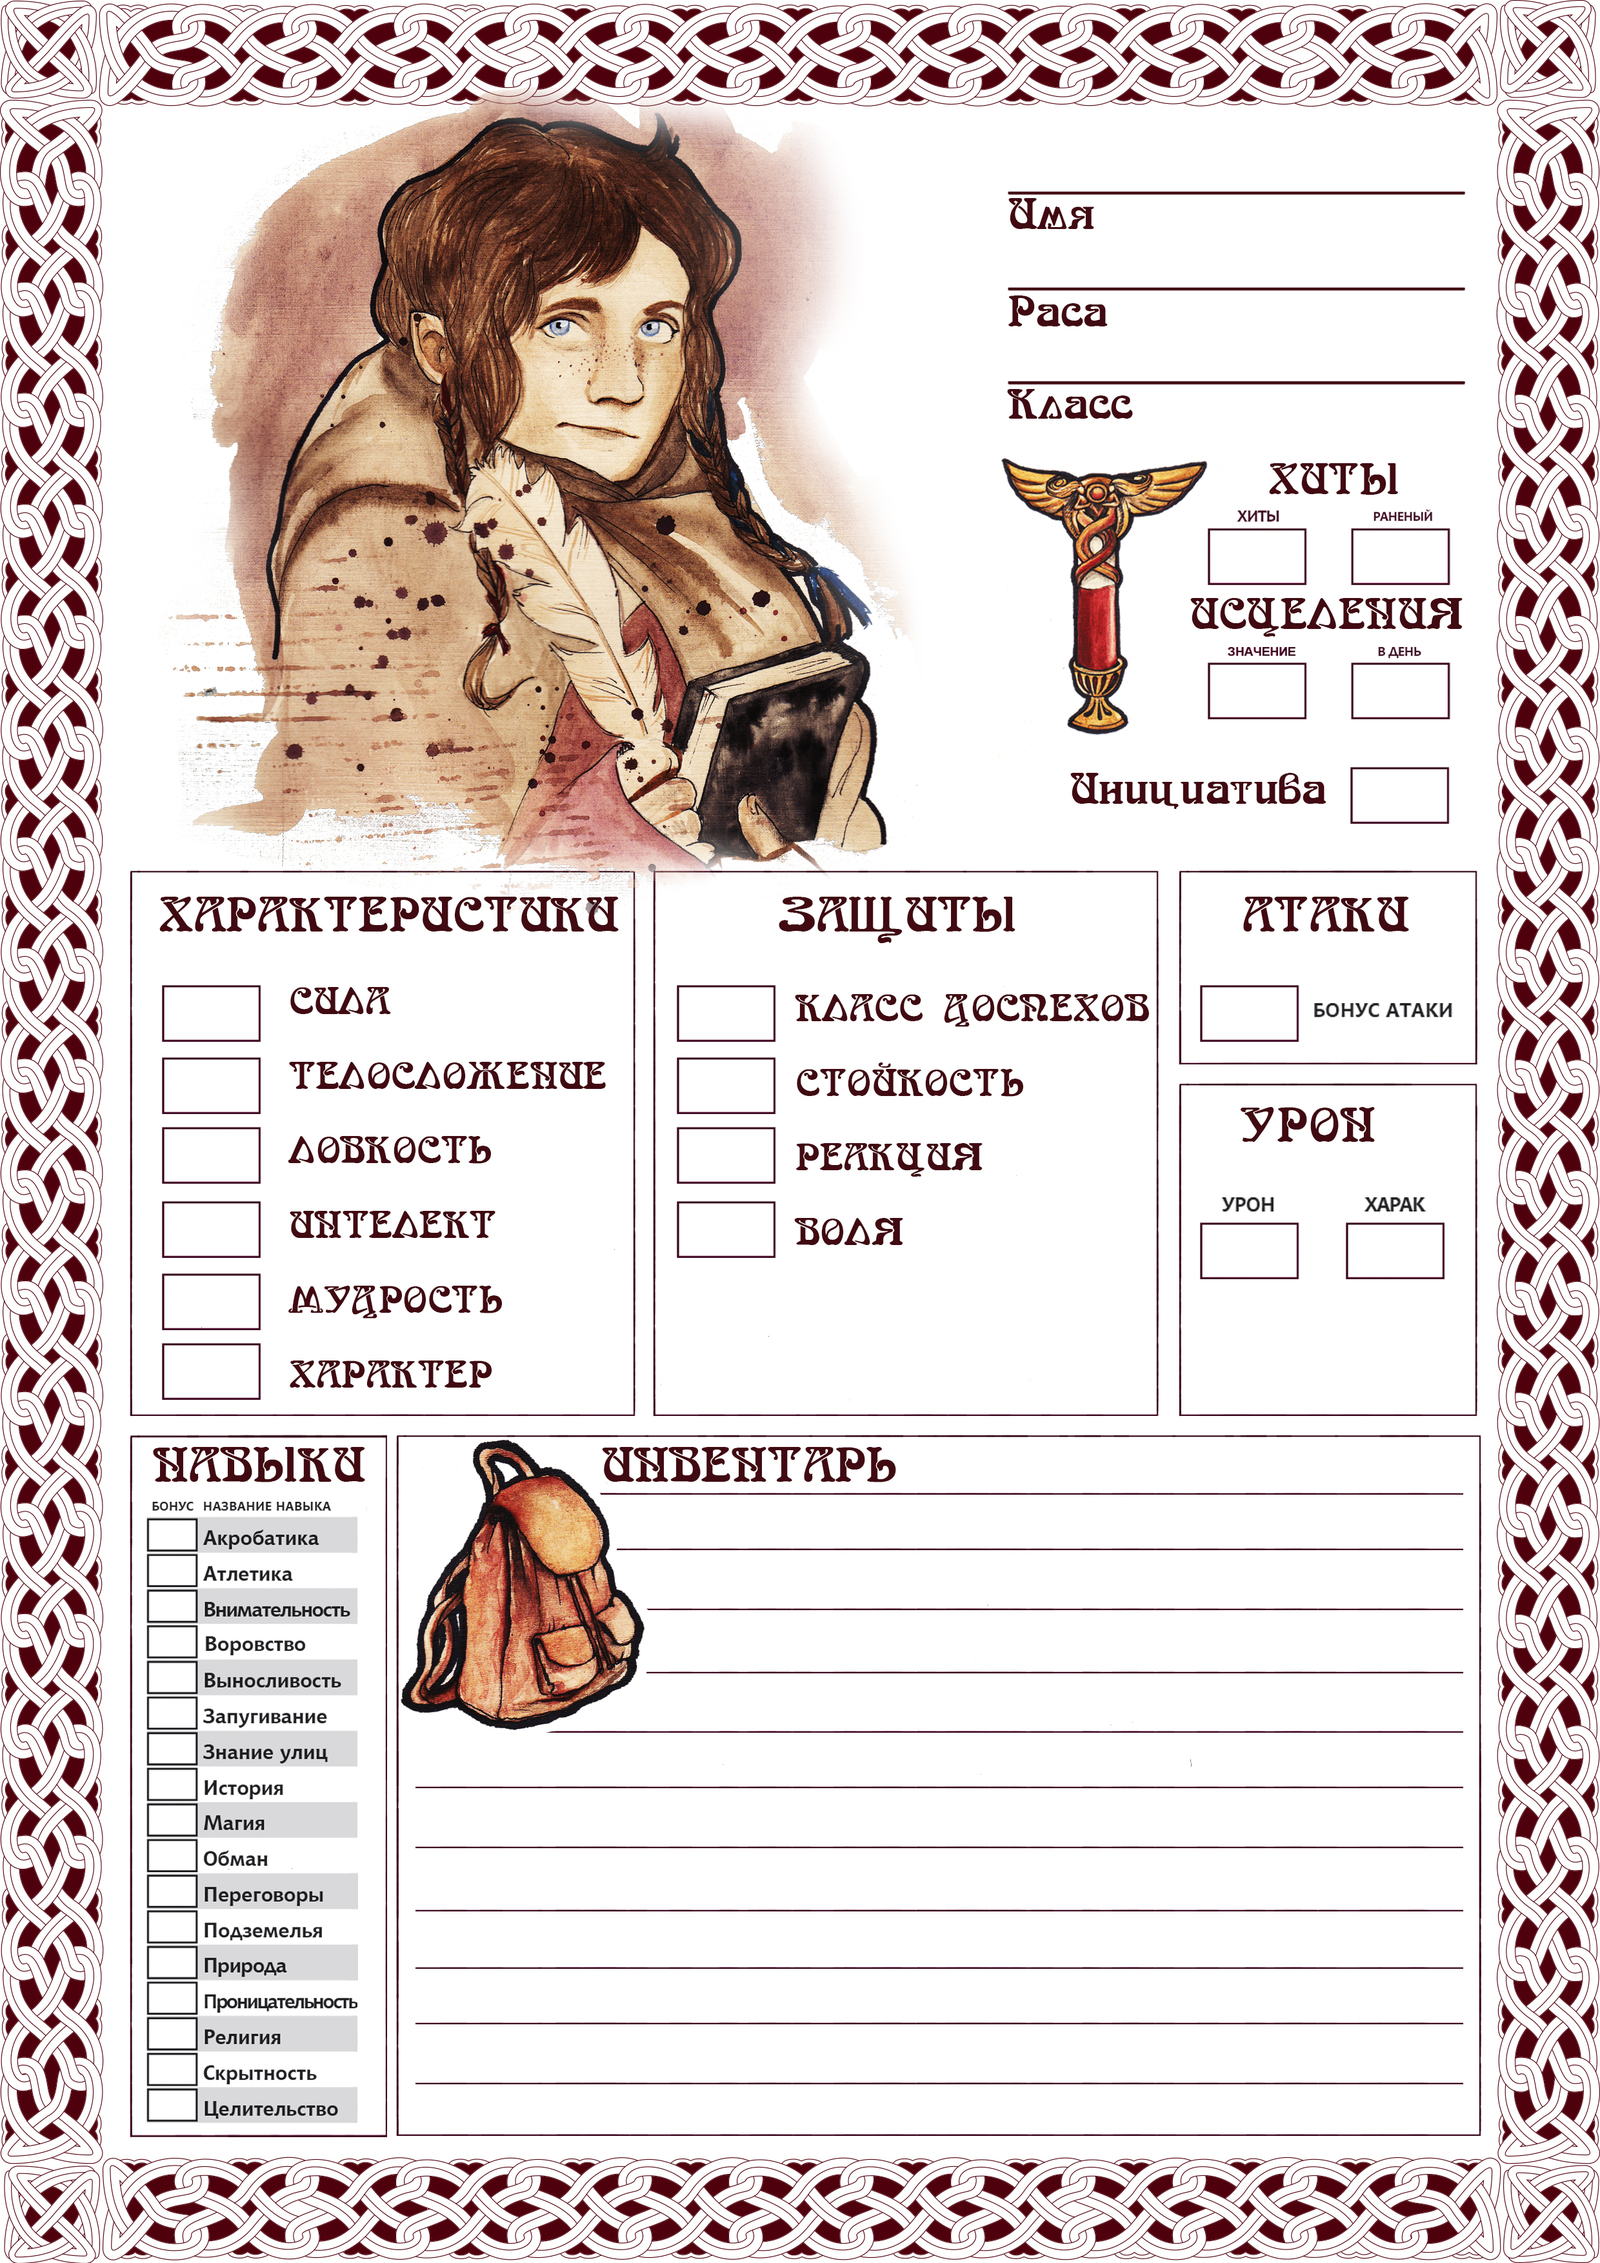 Character card